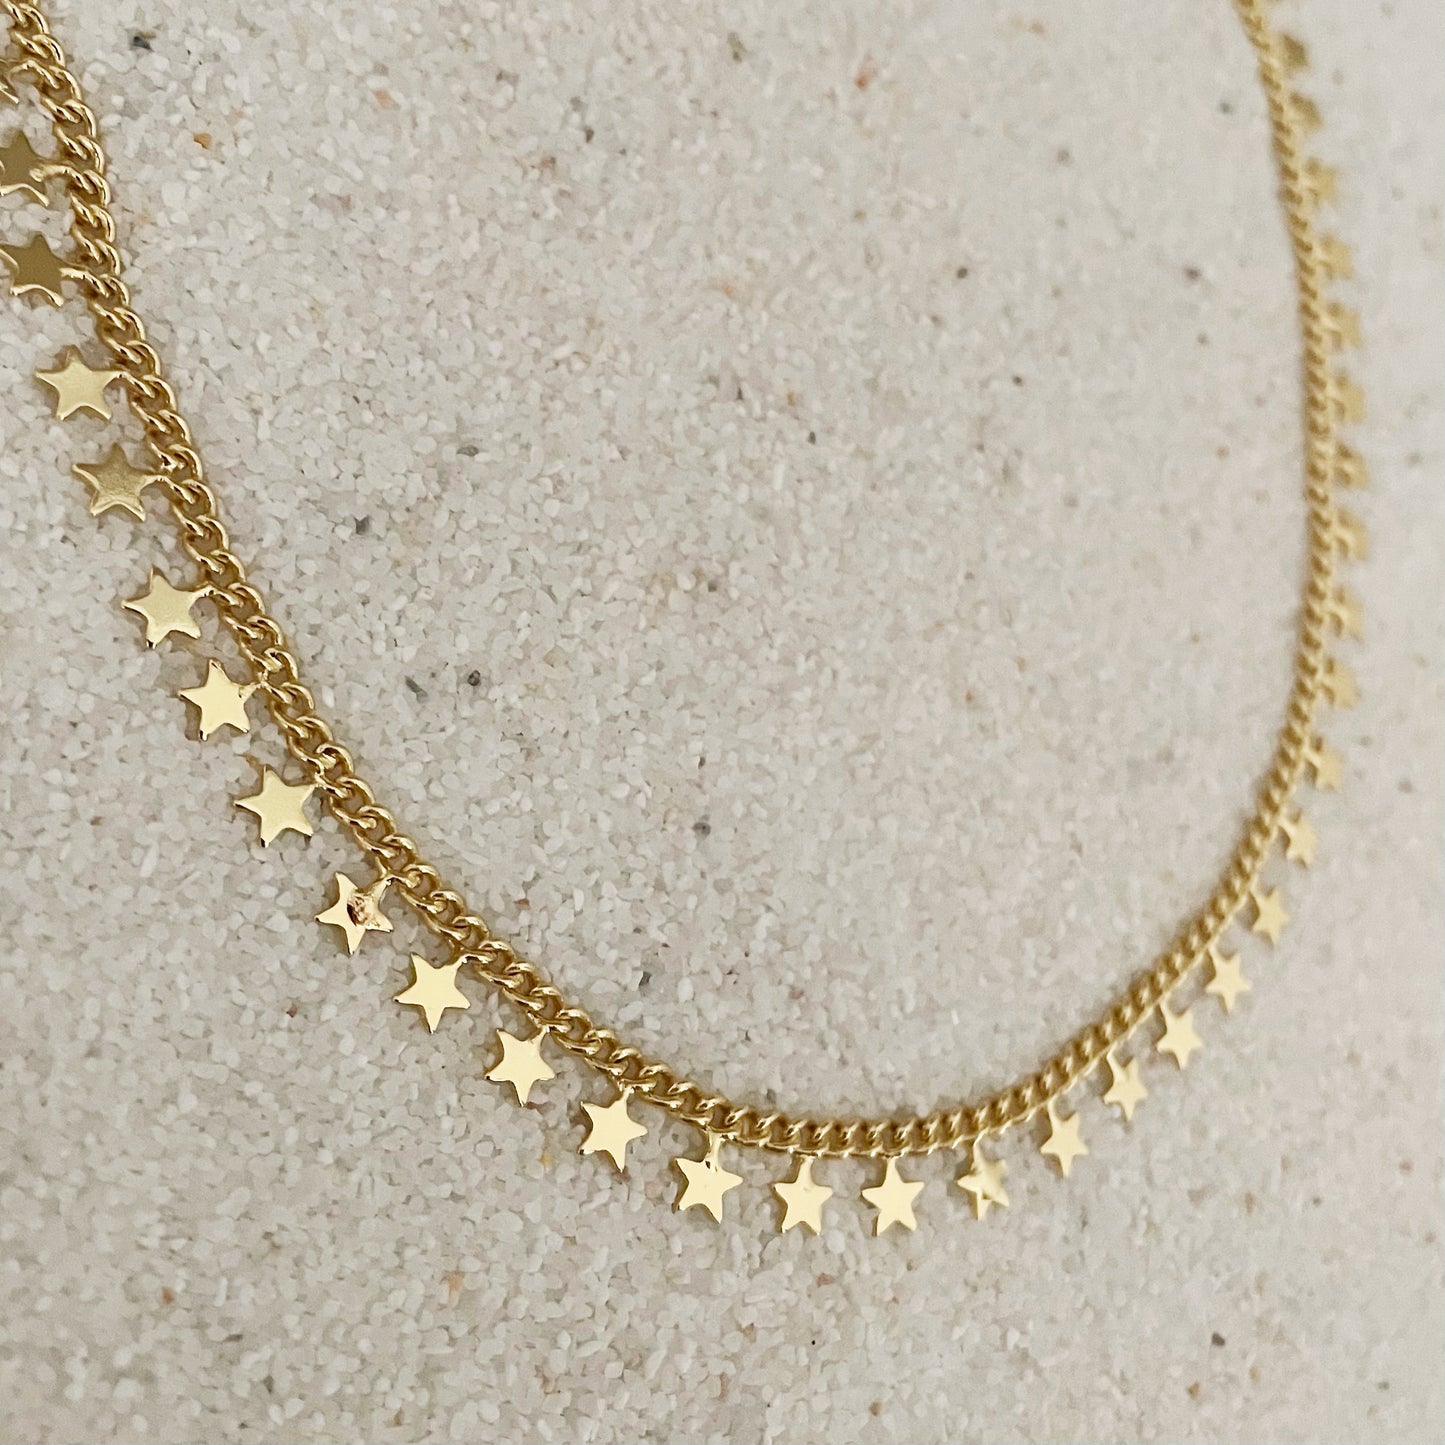 Fireworks Necklace. Gold Star Charm Chain Choker Necklace